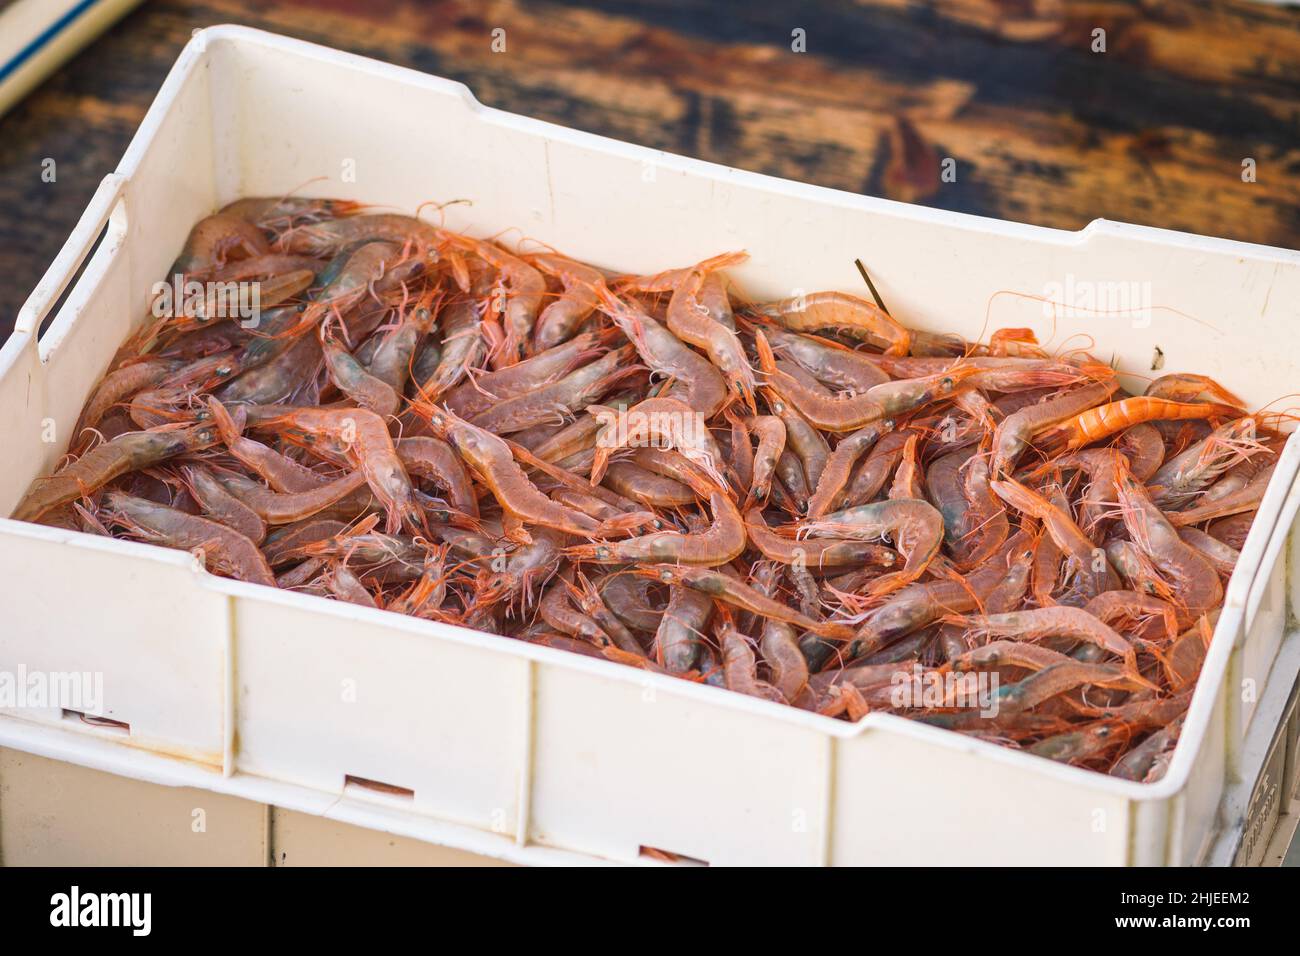 Freshly just caught shrimps and other fish in plastic crates on a fishing wooden boat ready to be sold at the fish market Stock Photo